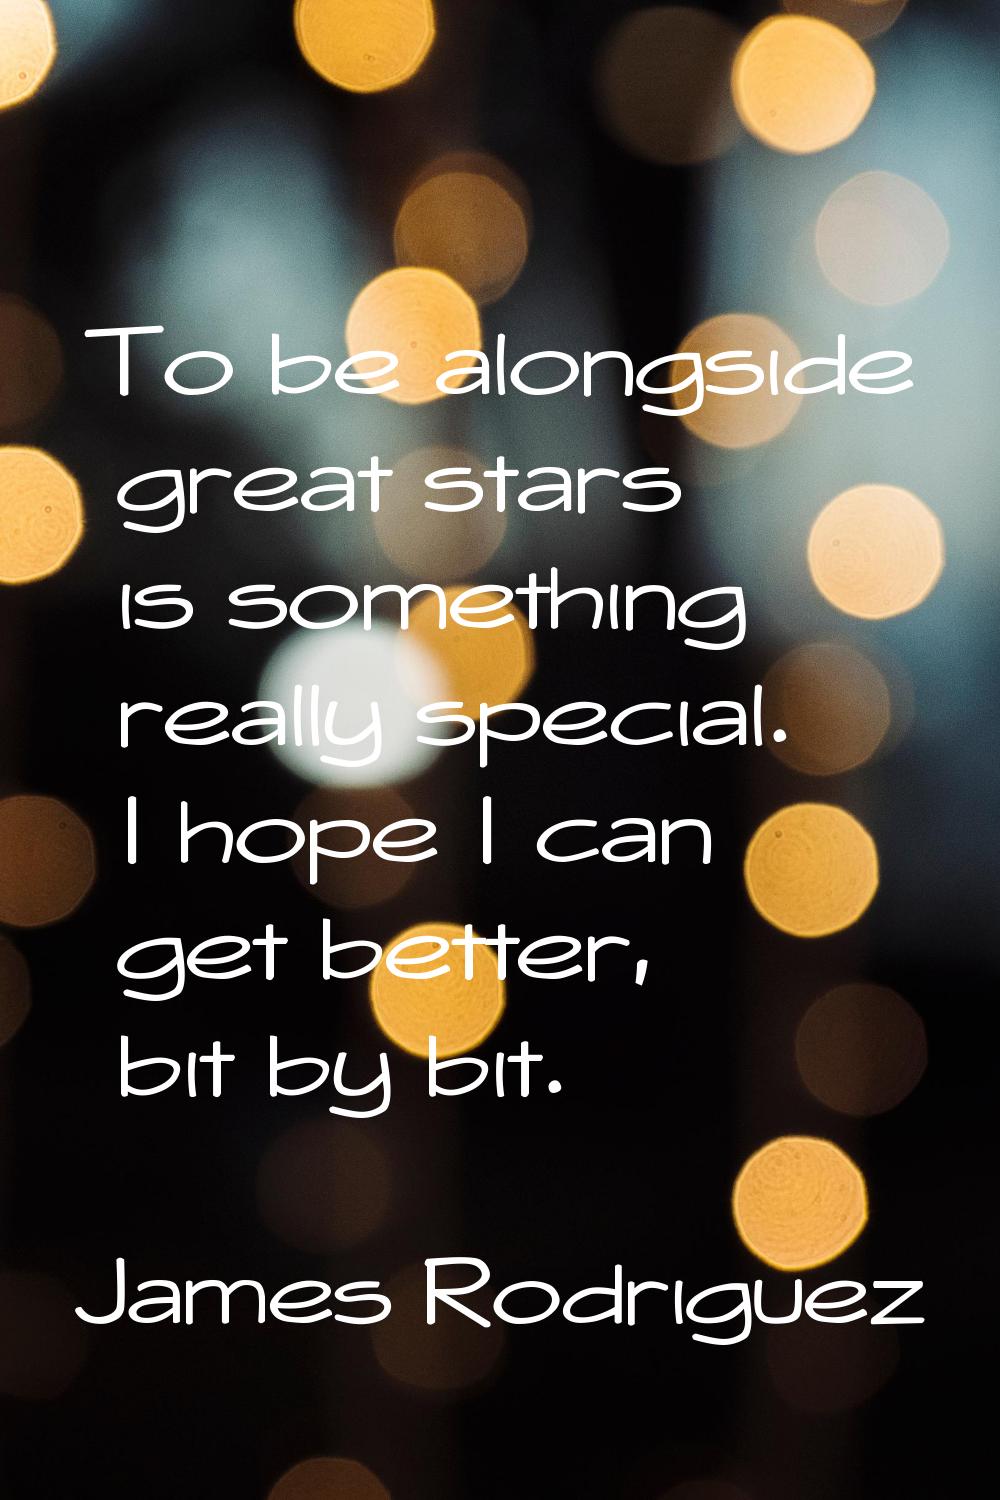 To be alongside great stars is something really special. I hope I can get better, bit by bit.